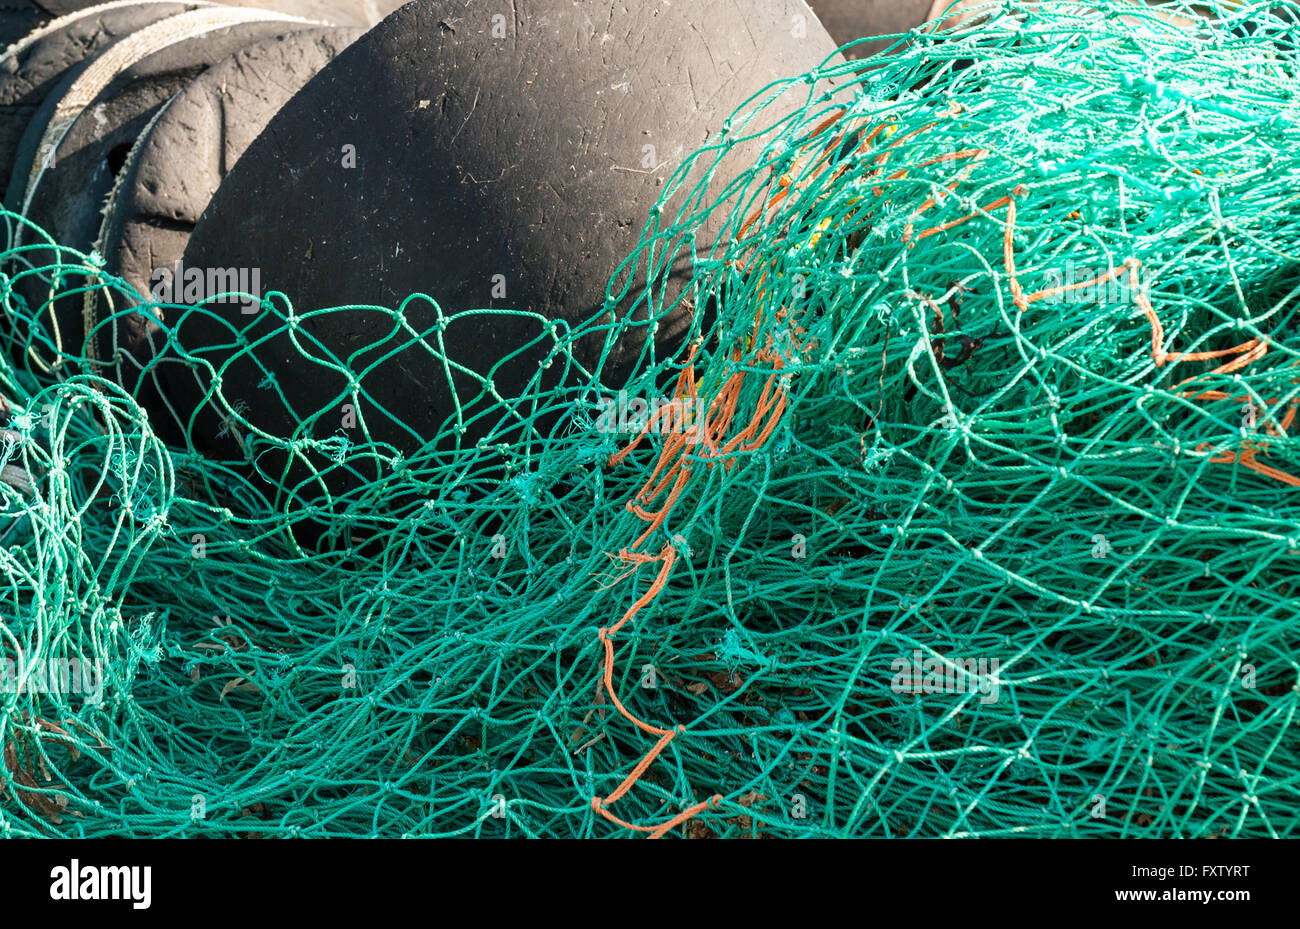 Fishing Nets Floating On The Sea On A Wood Stock Photo, Picture and Royalty  Free Image. Image 97131778.